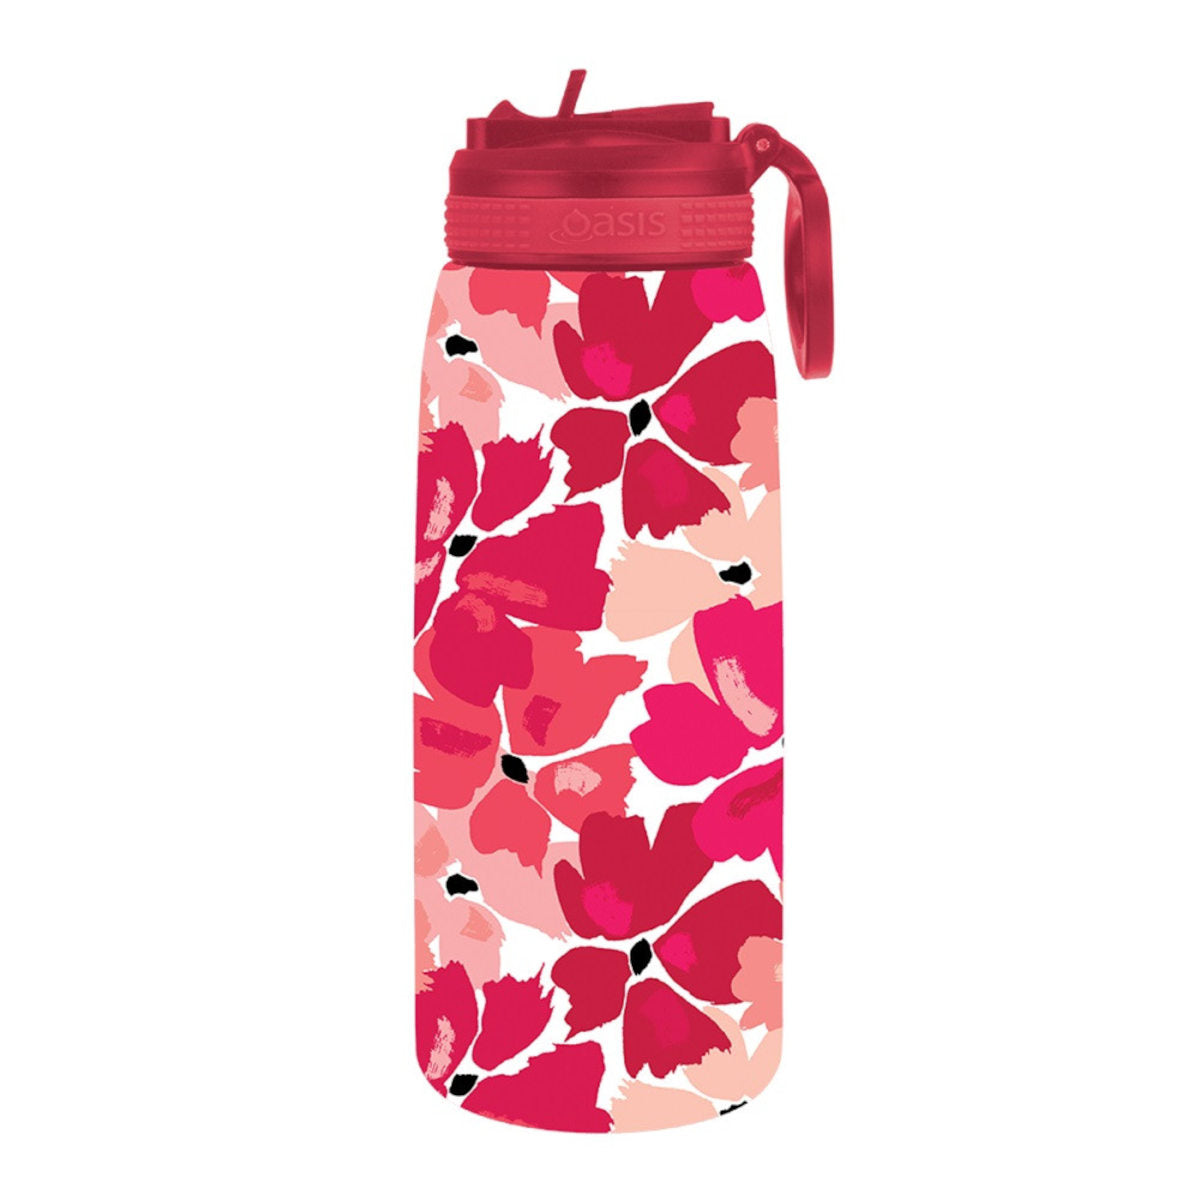 Oasis Stainless Steel Sports Bottle with Straw Red Poppies 780ml | Minimax